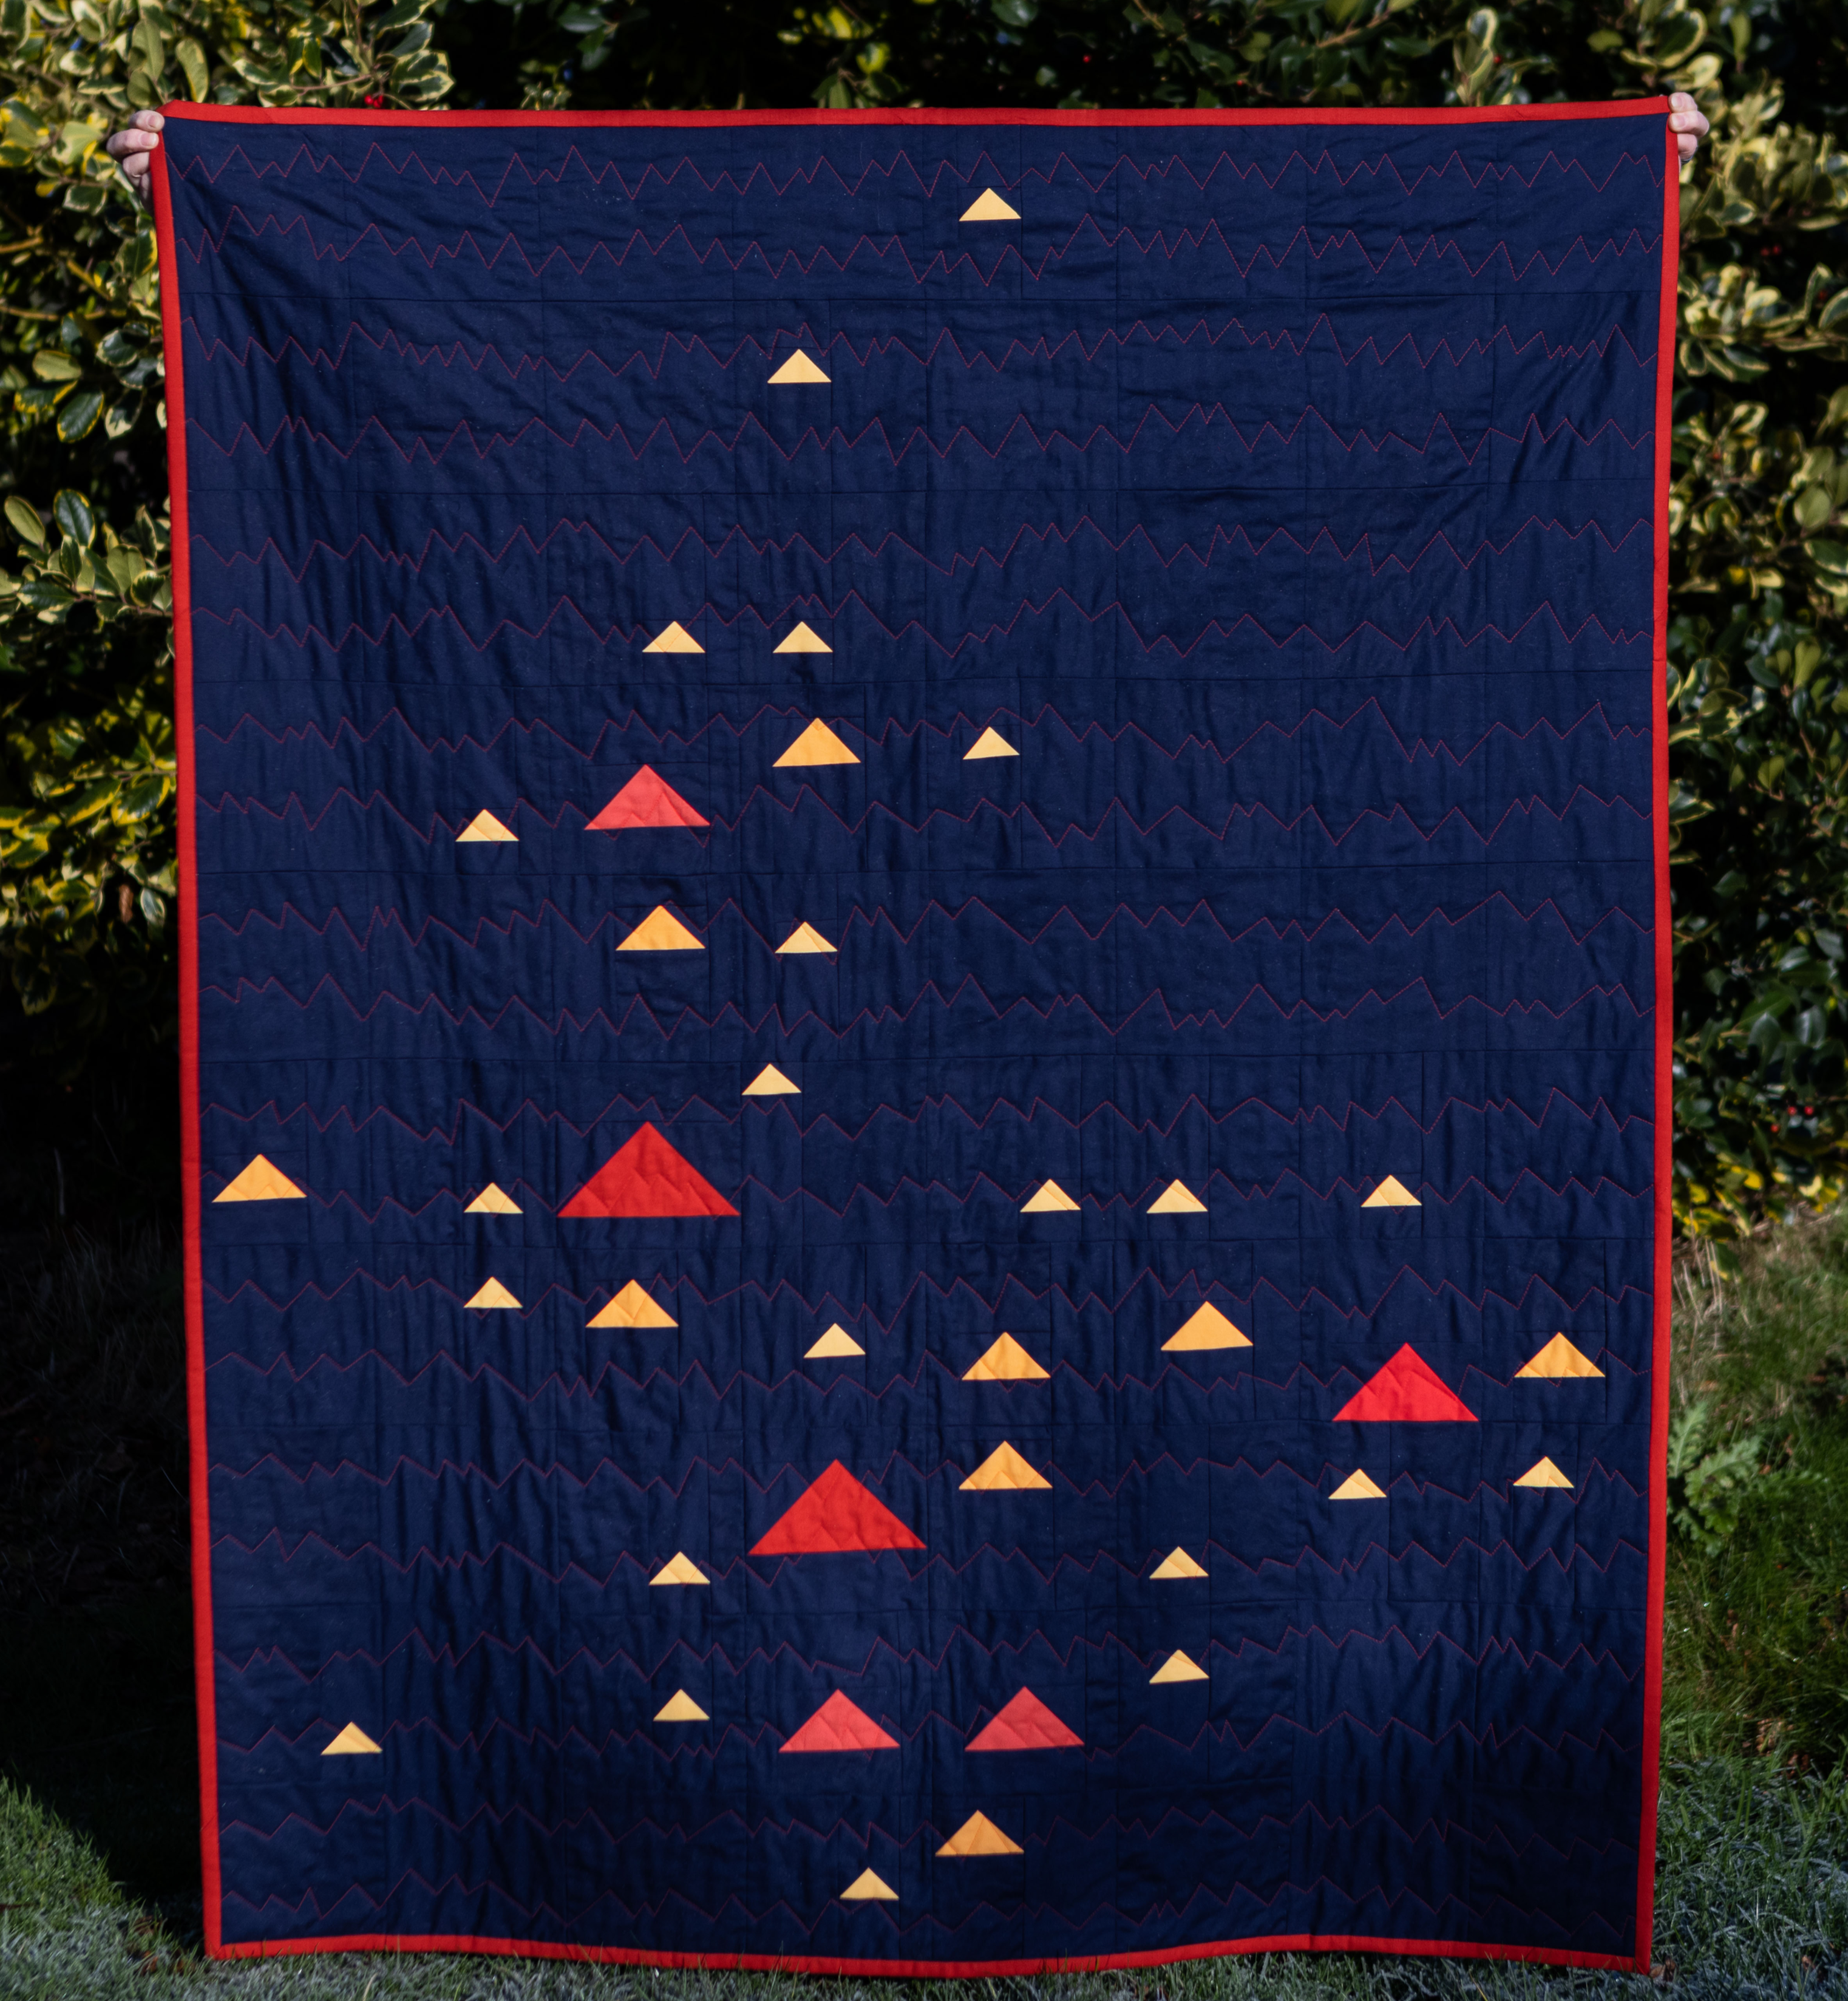 Full Monadh quilt in dark blue with flying geese in red/orange/yellows